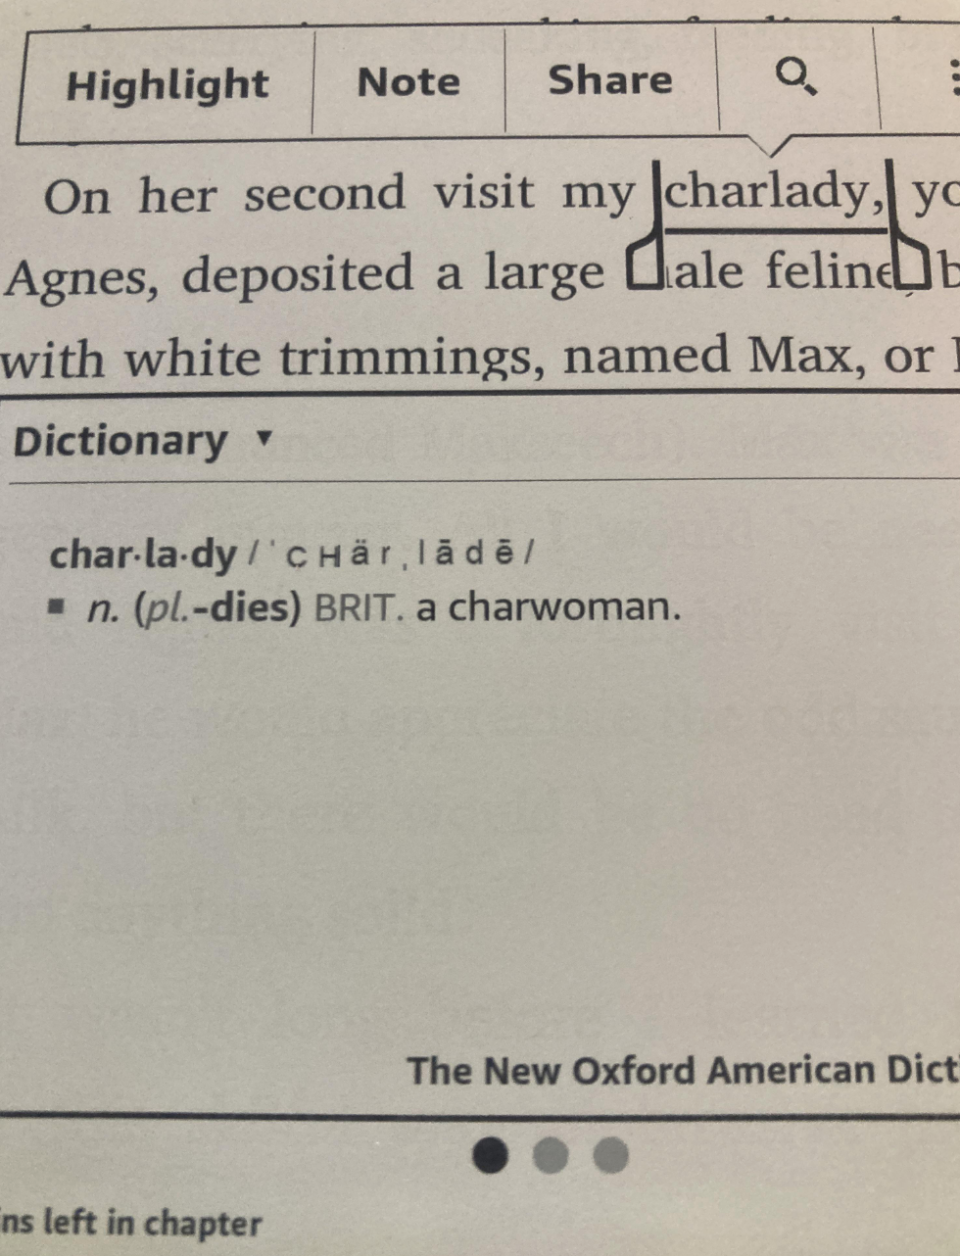 Dictionary defining "charlady" as British for "charwoman"